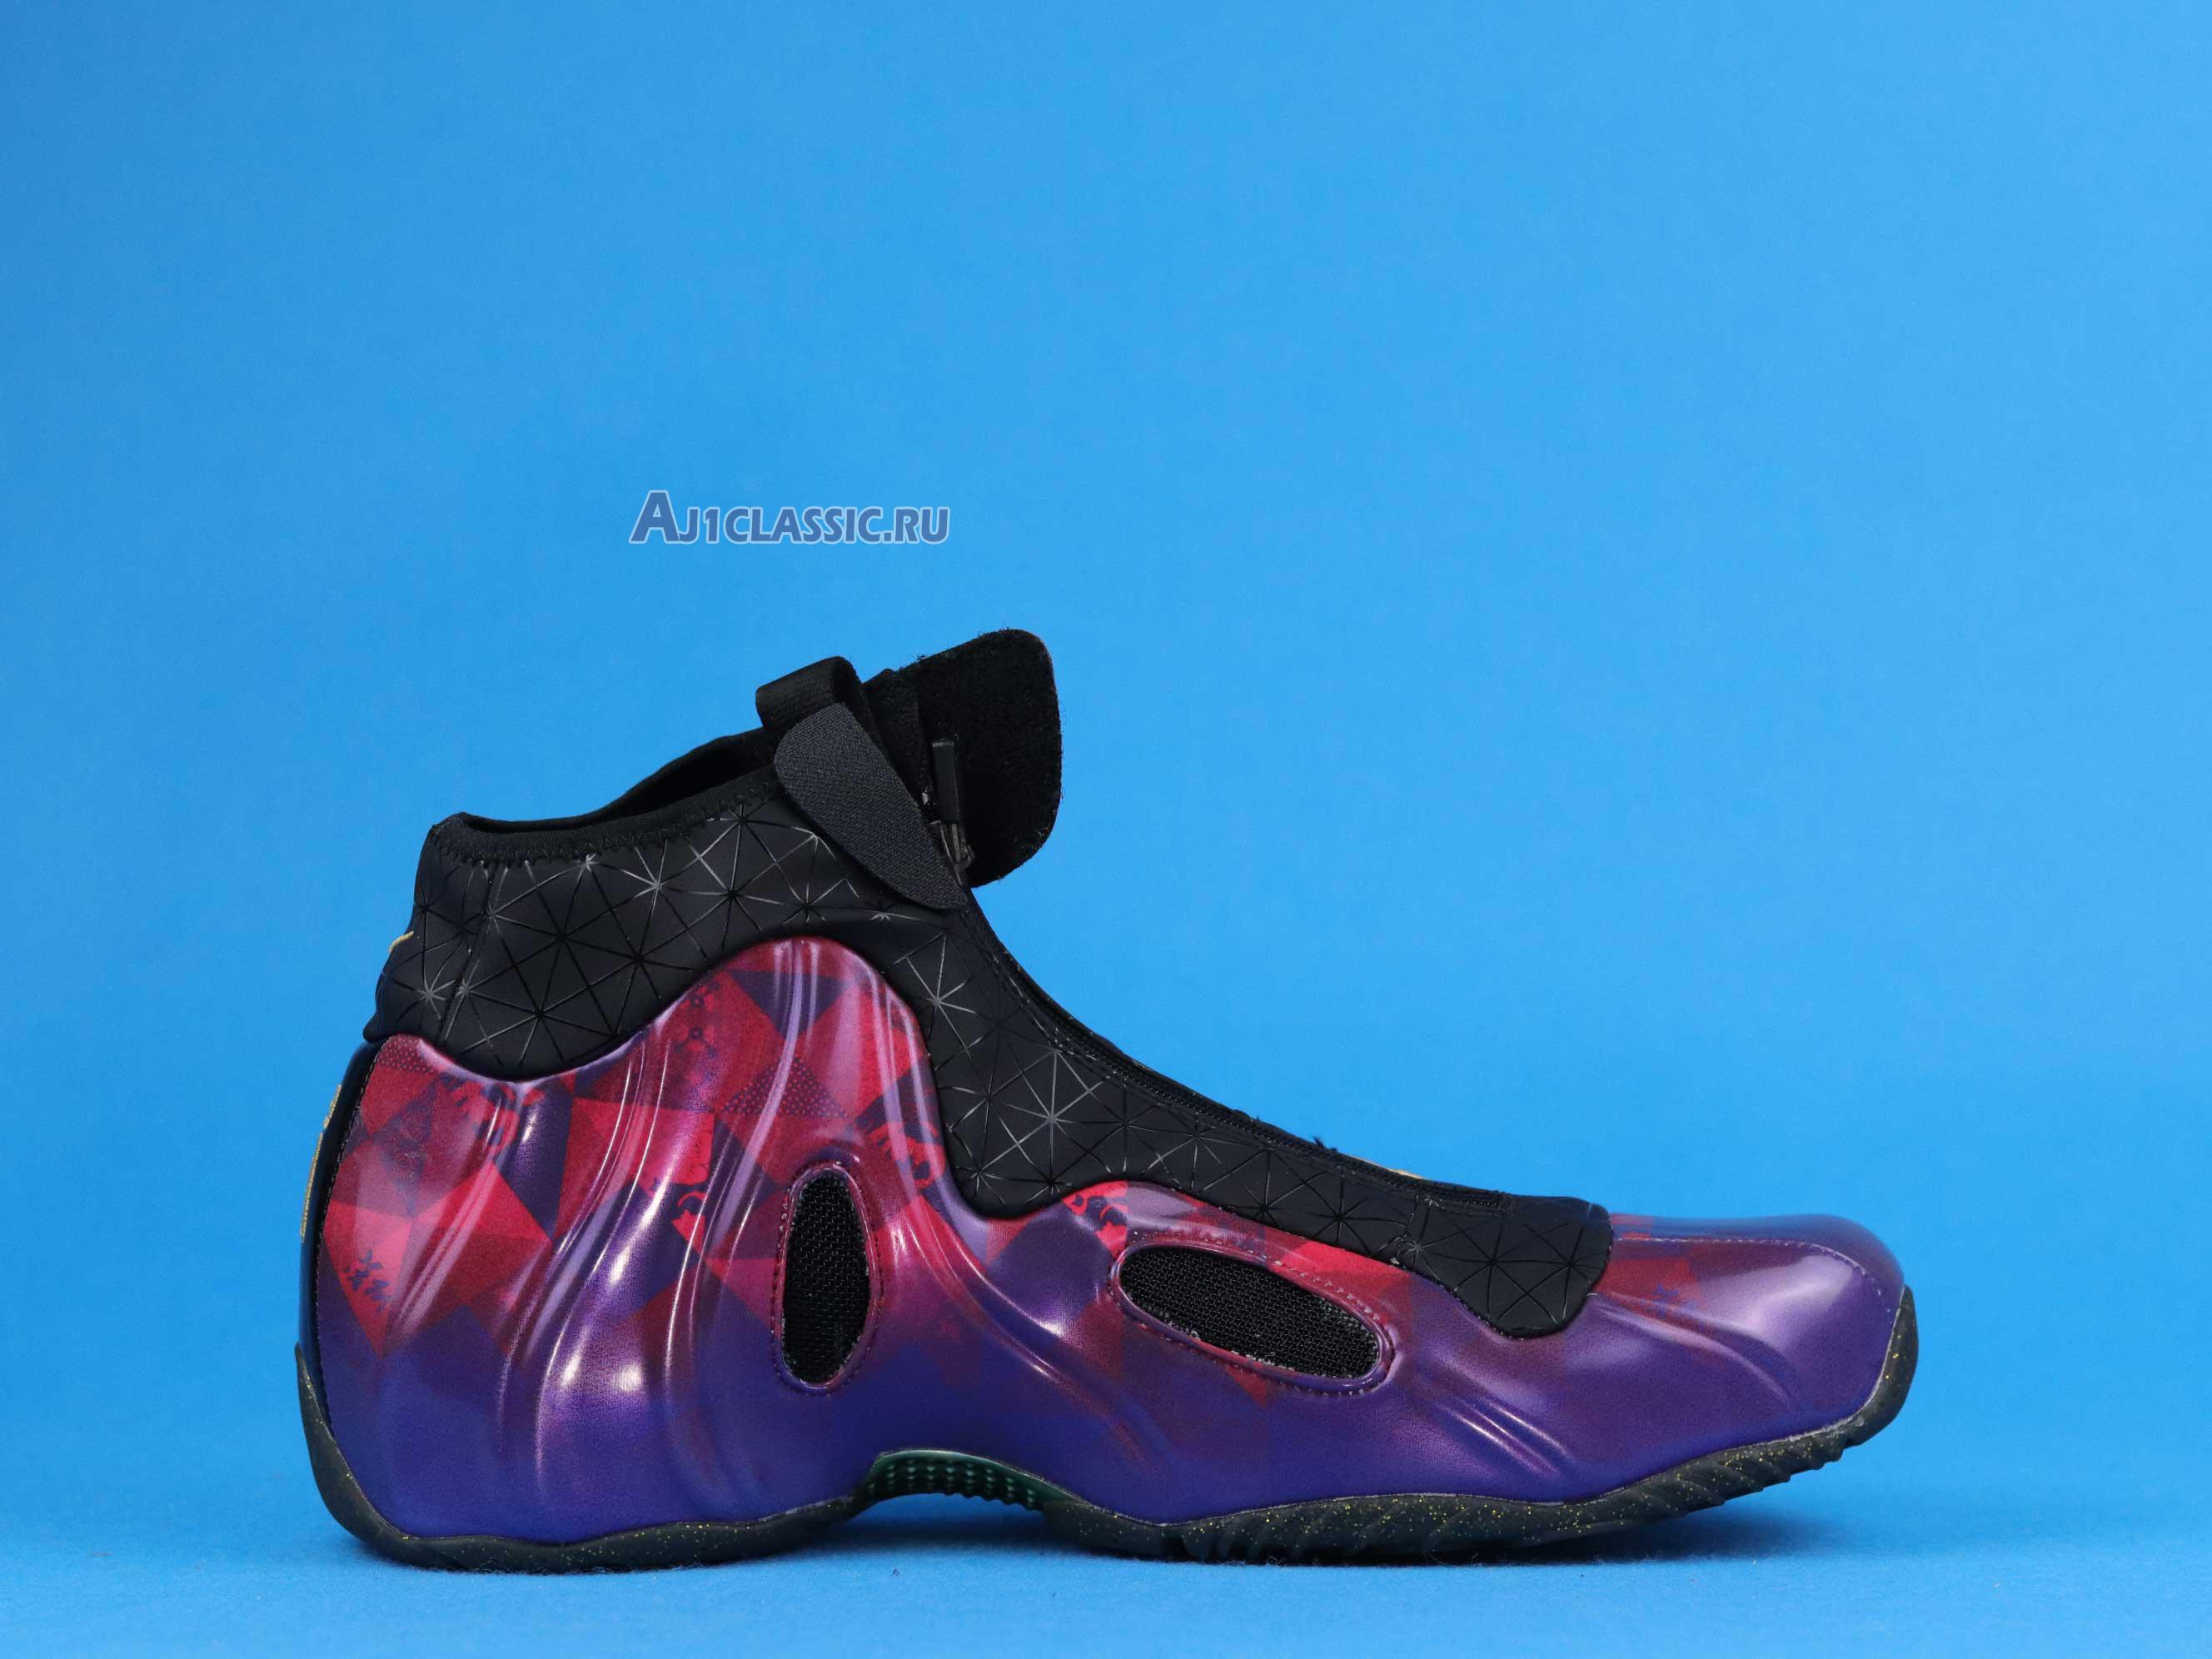 Nike Air Foamposite One "Chinese New Year" BV6648-605